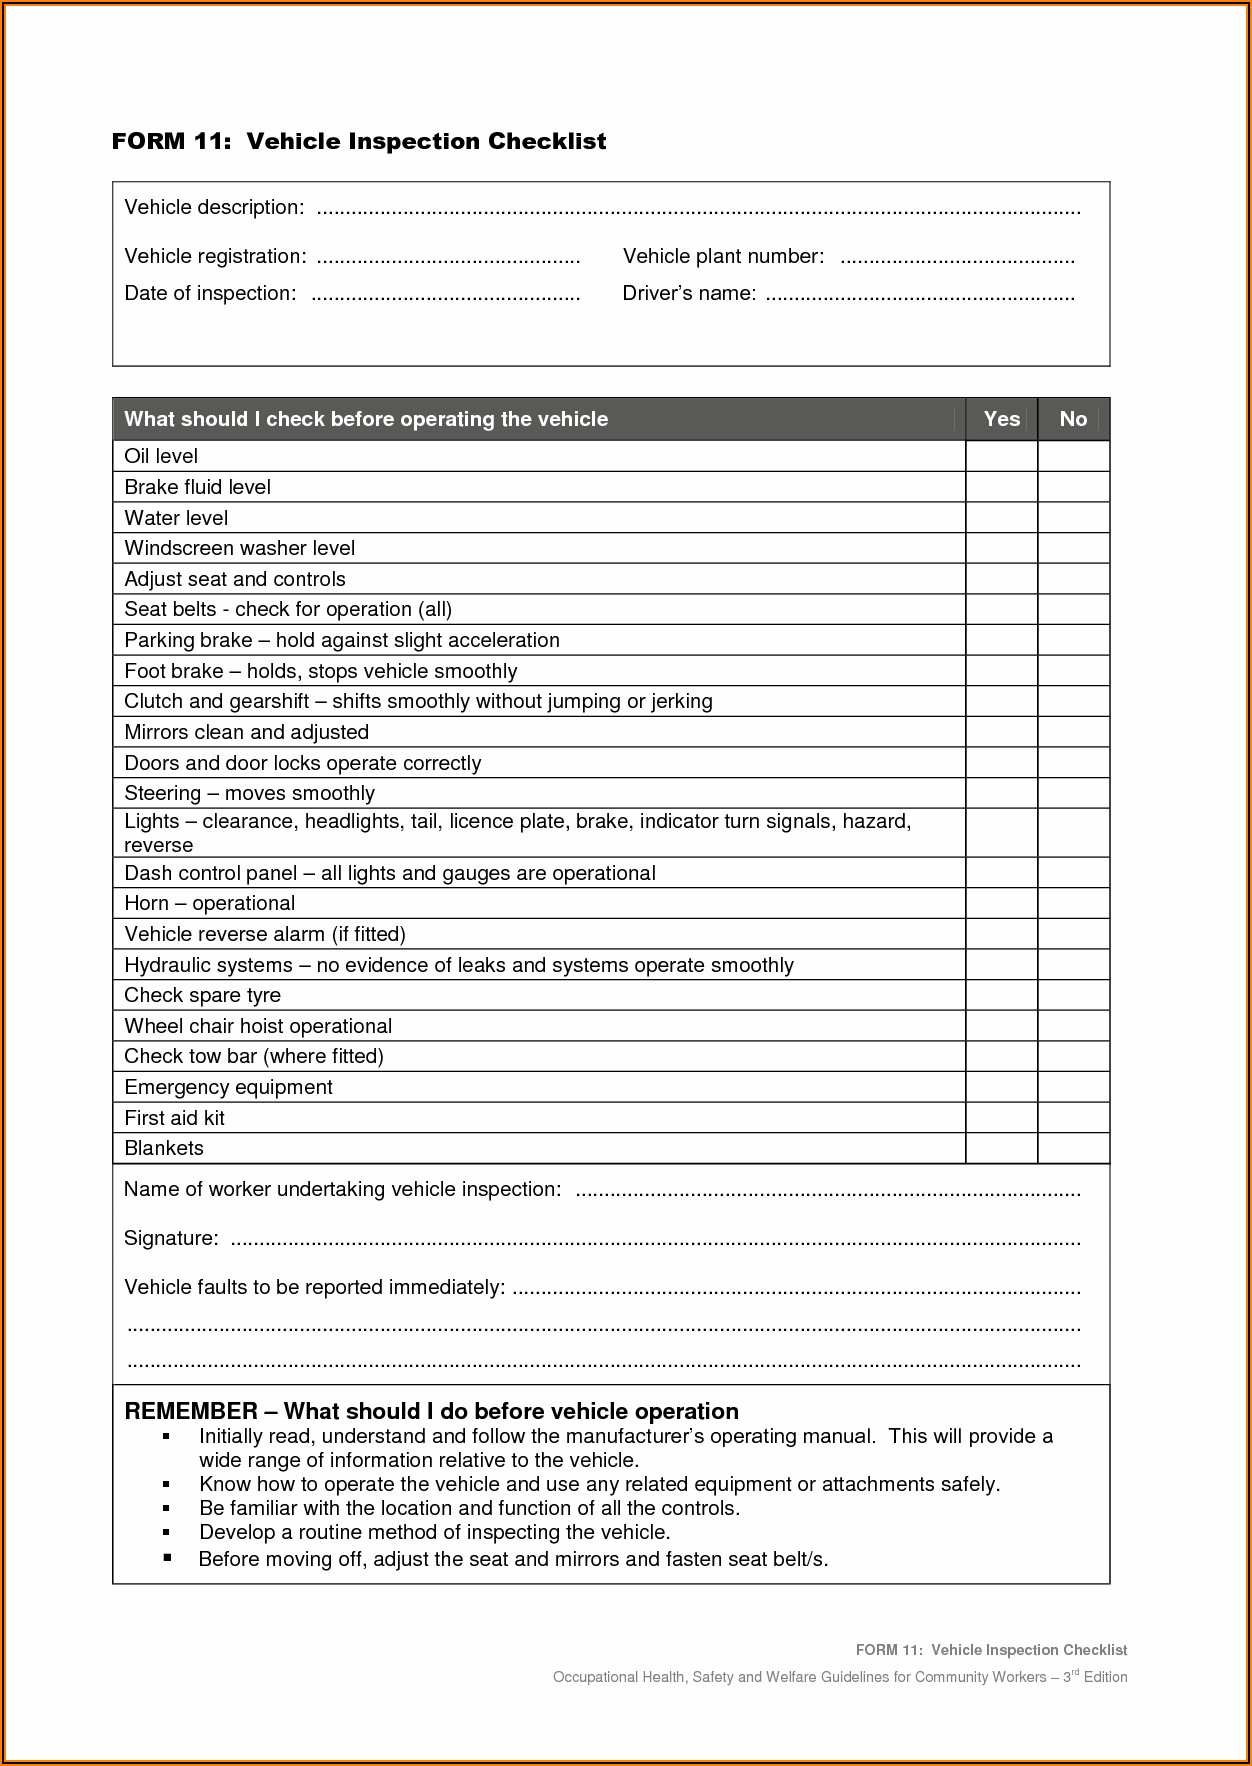 Vehicle Inspection Checklist Template Free